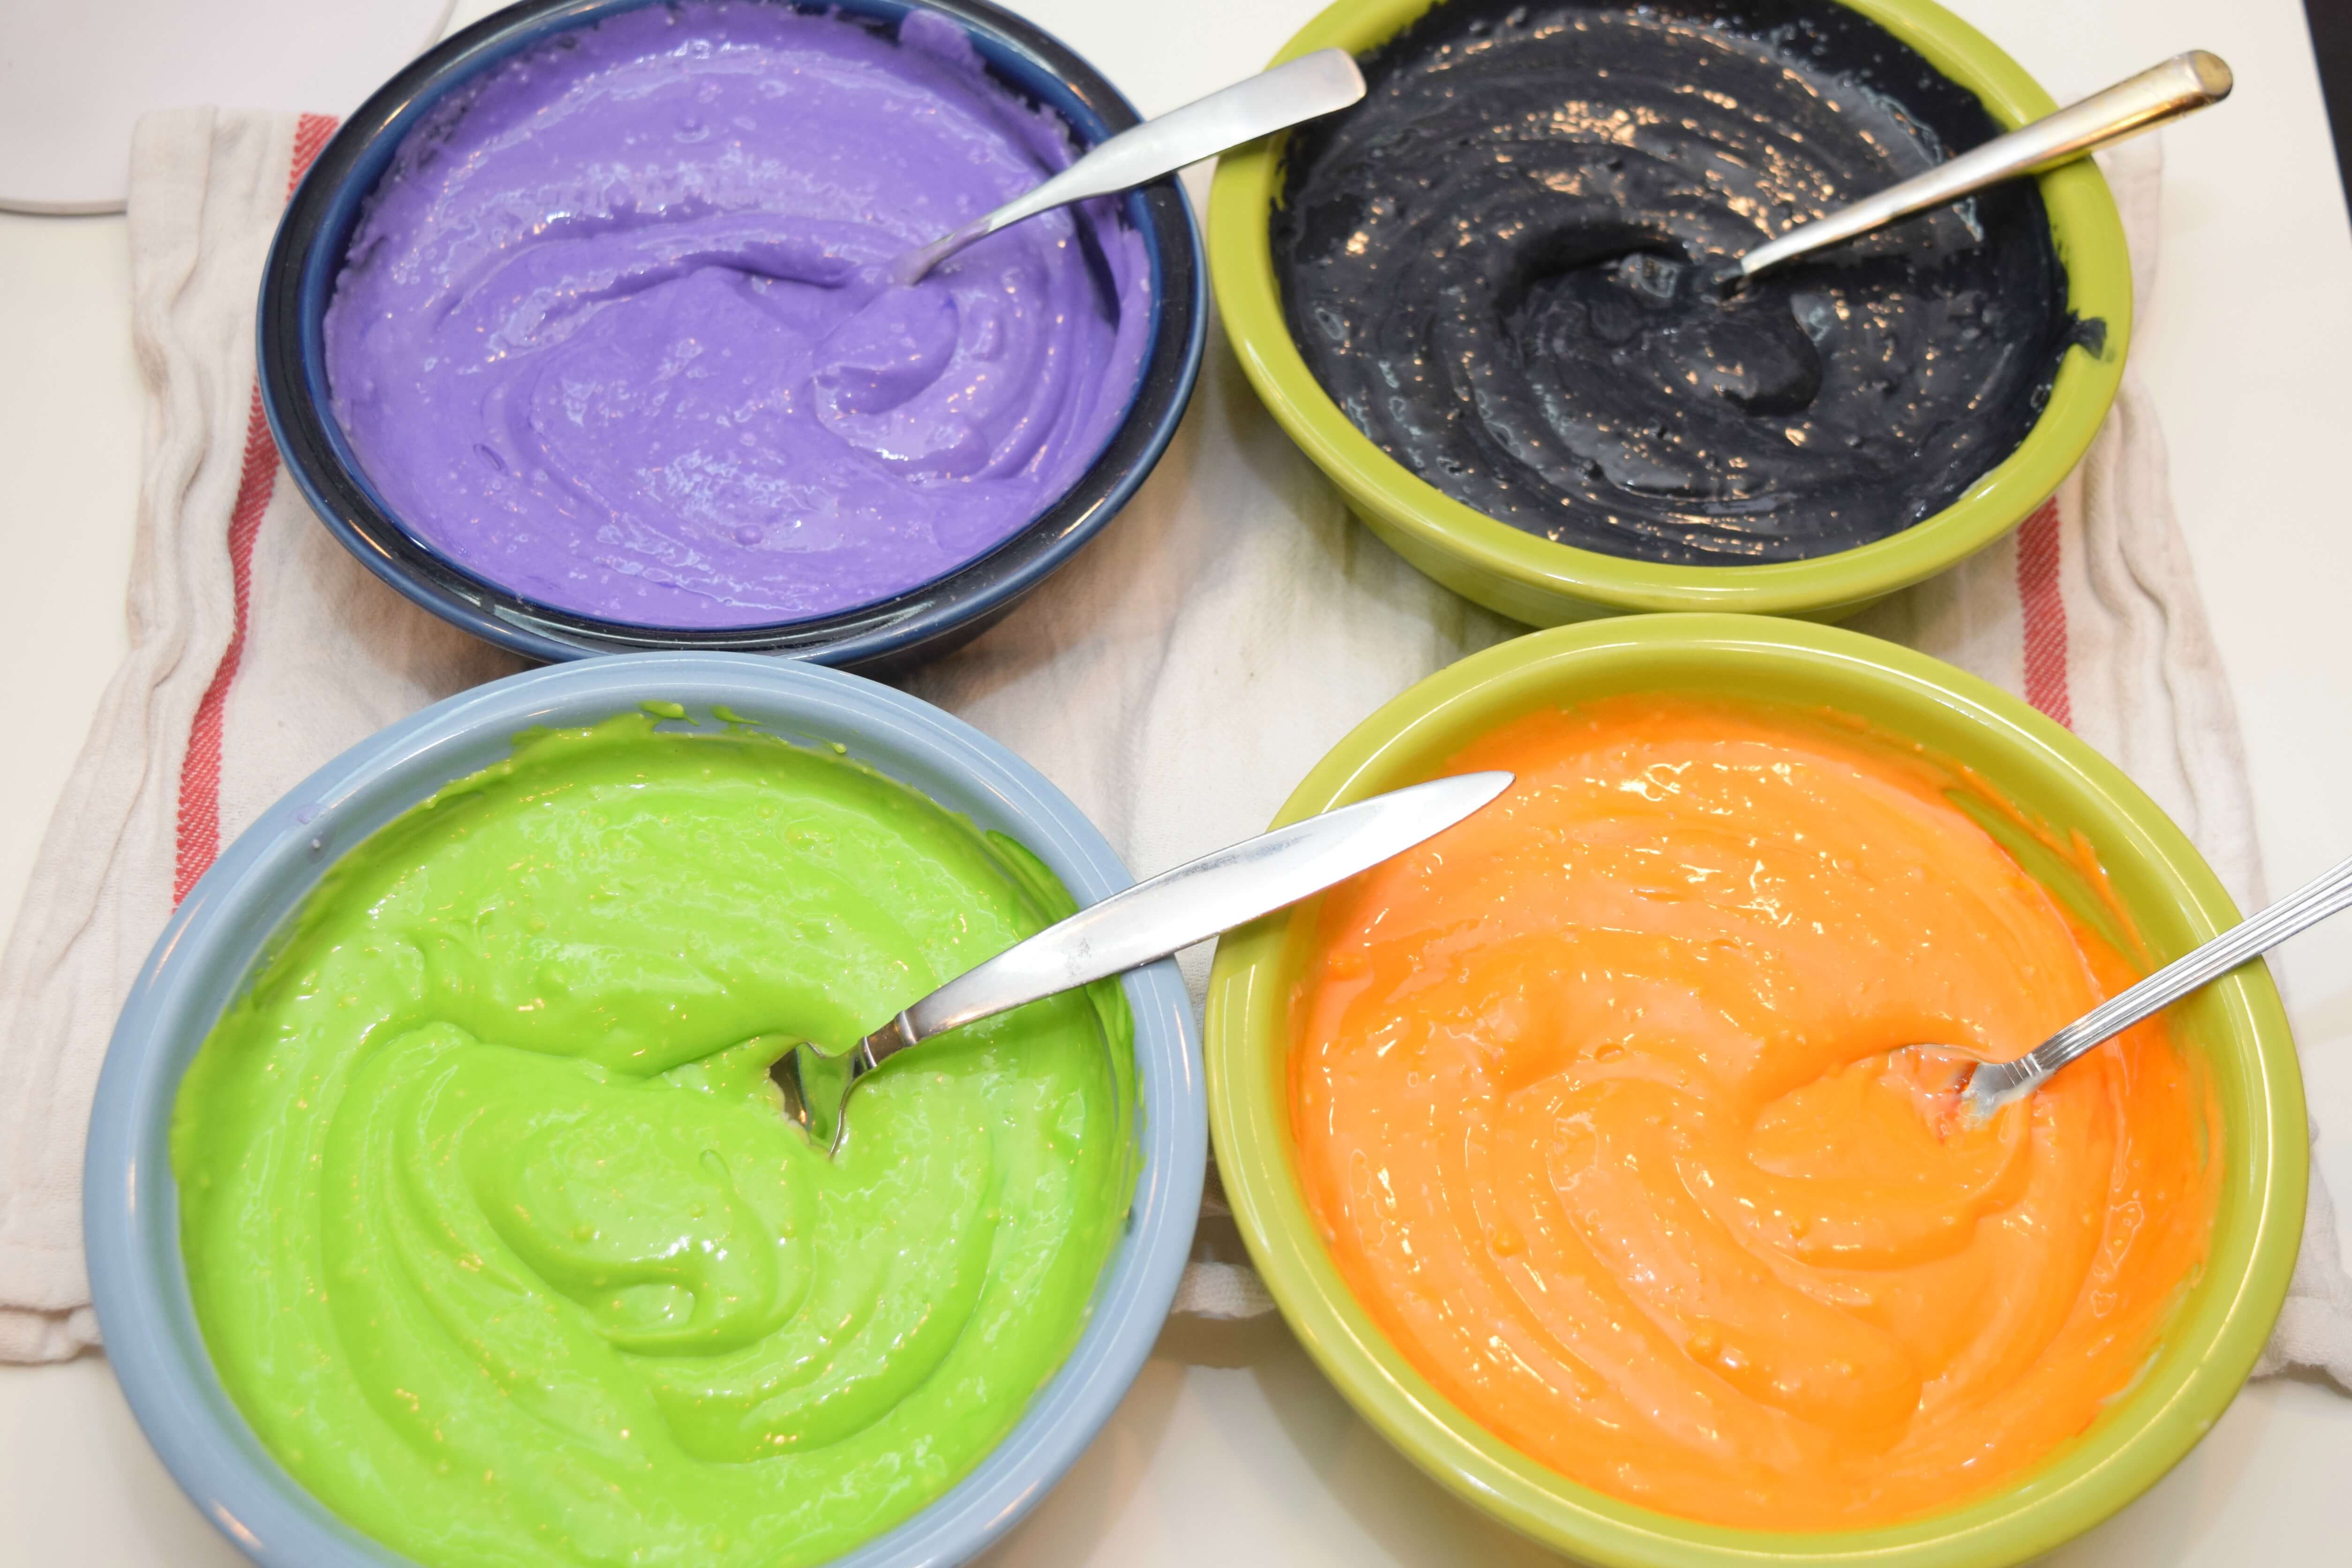 Divide the cheesecake batter into four Halloween colors.